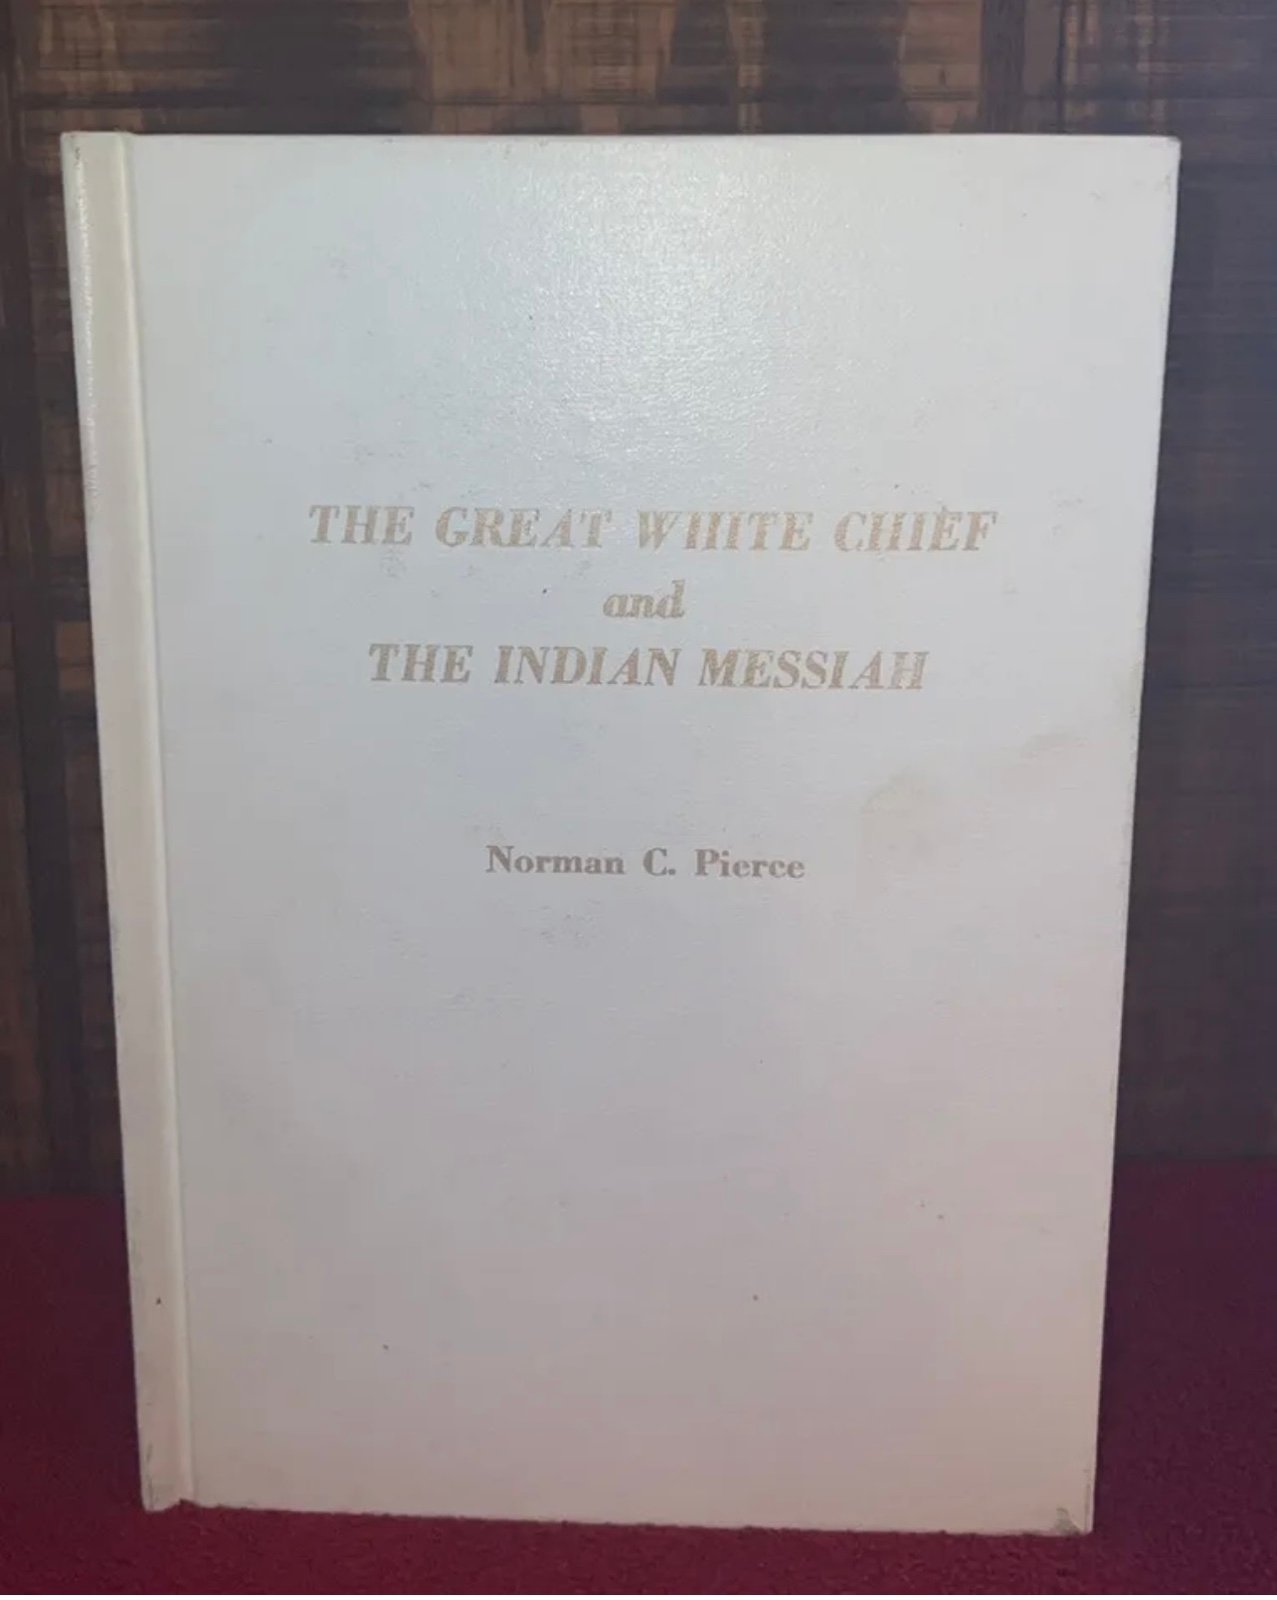 The Great White Chief and The Indian Messiah by Norman C. Pierce~Signed Ltr ddmlYAENz